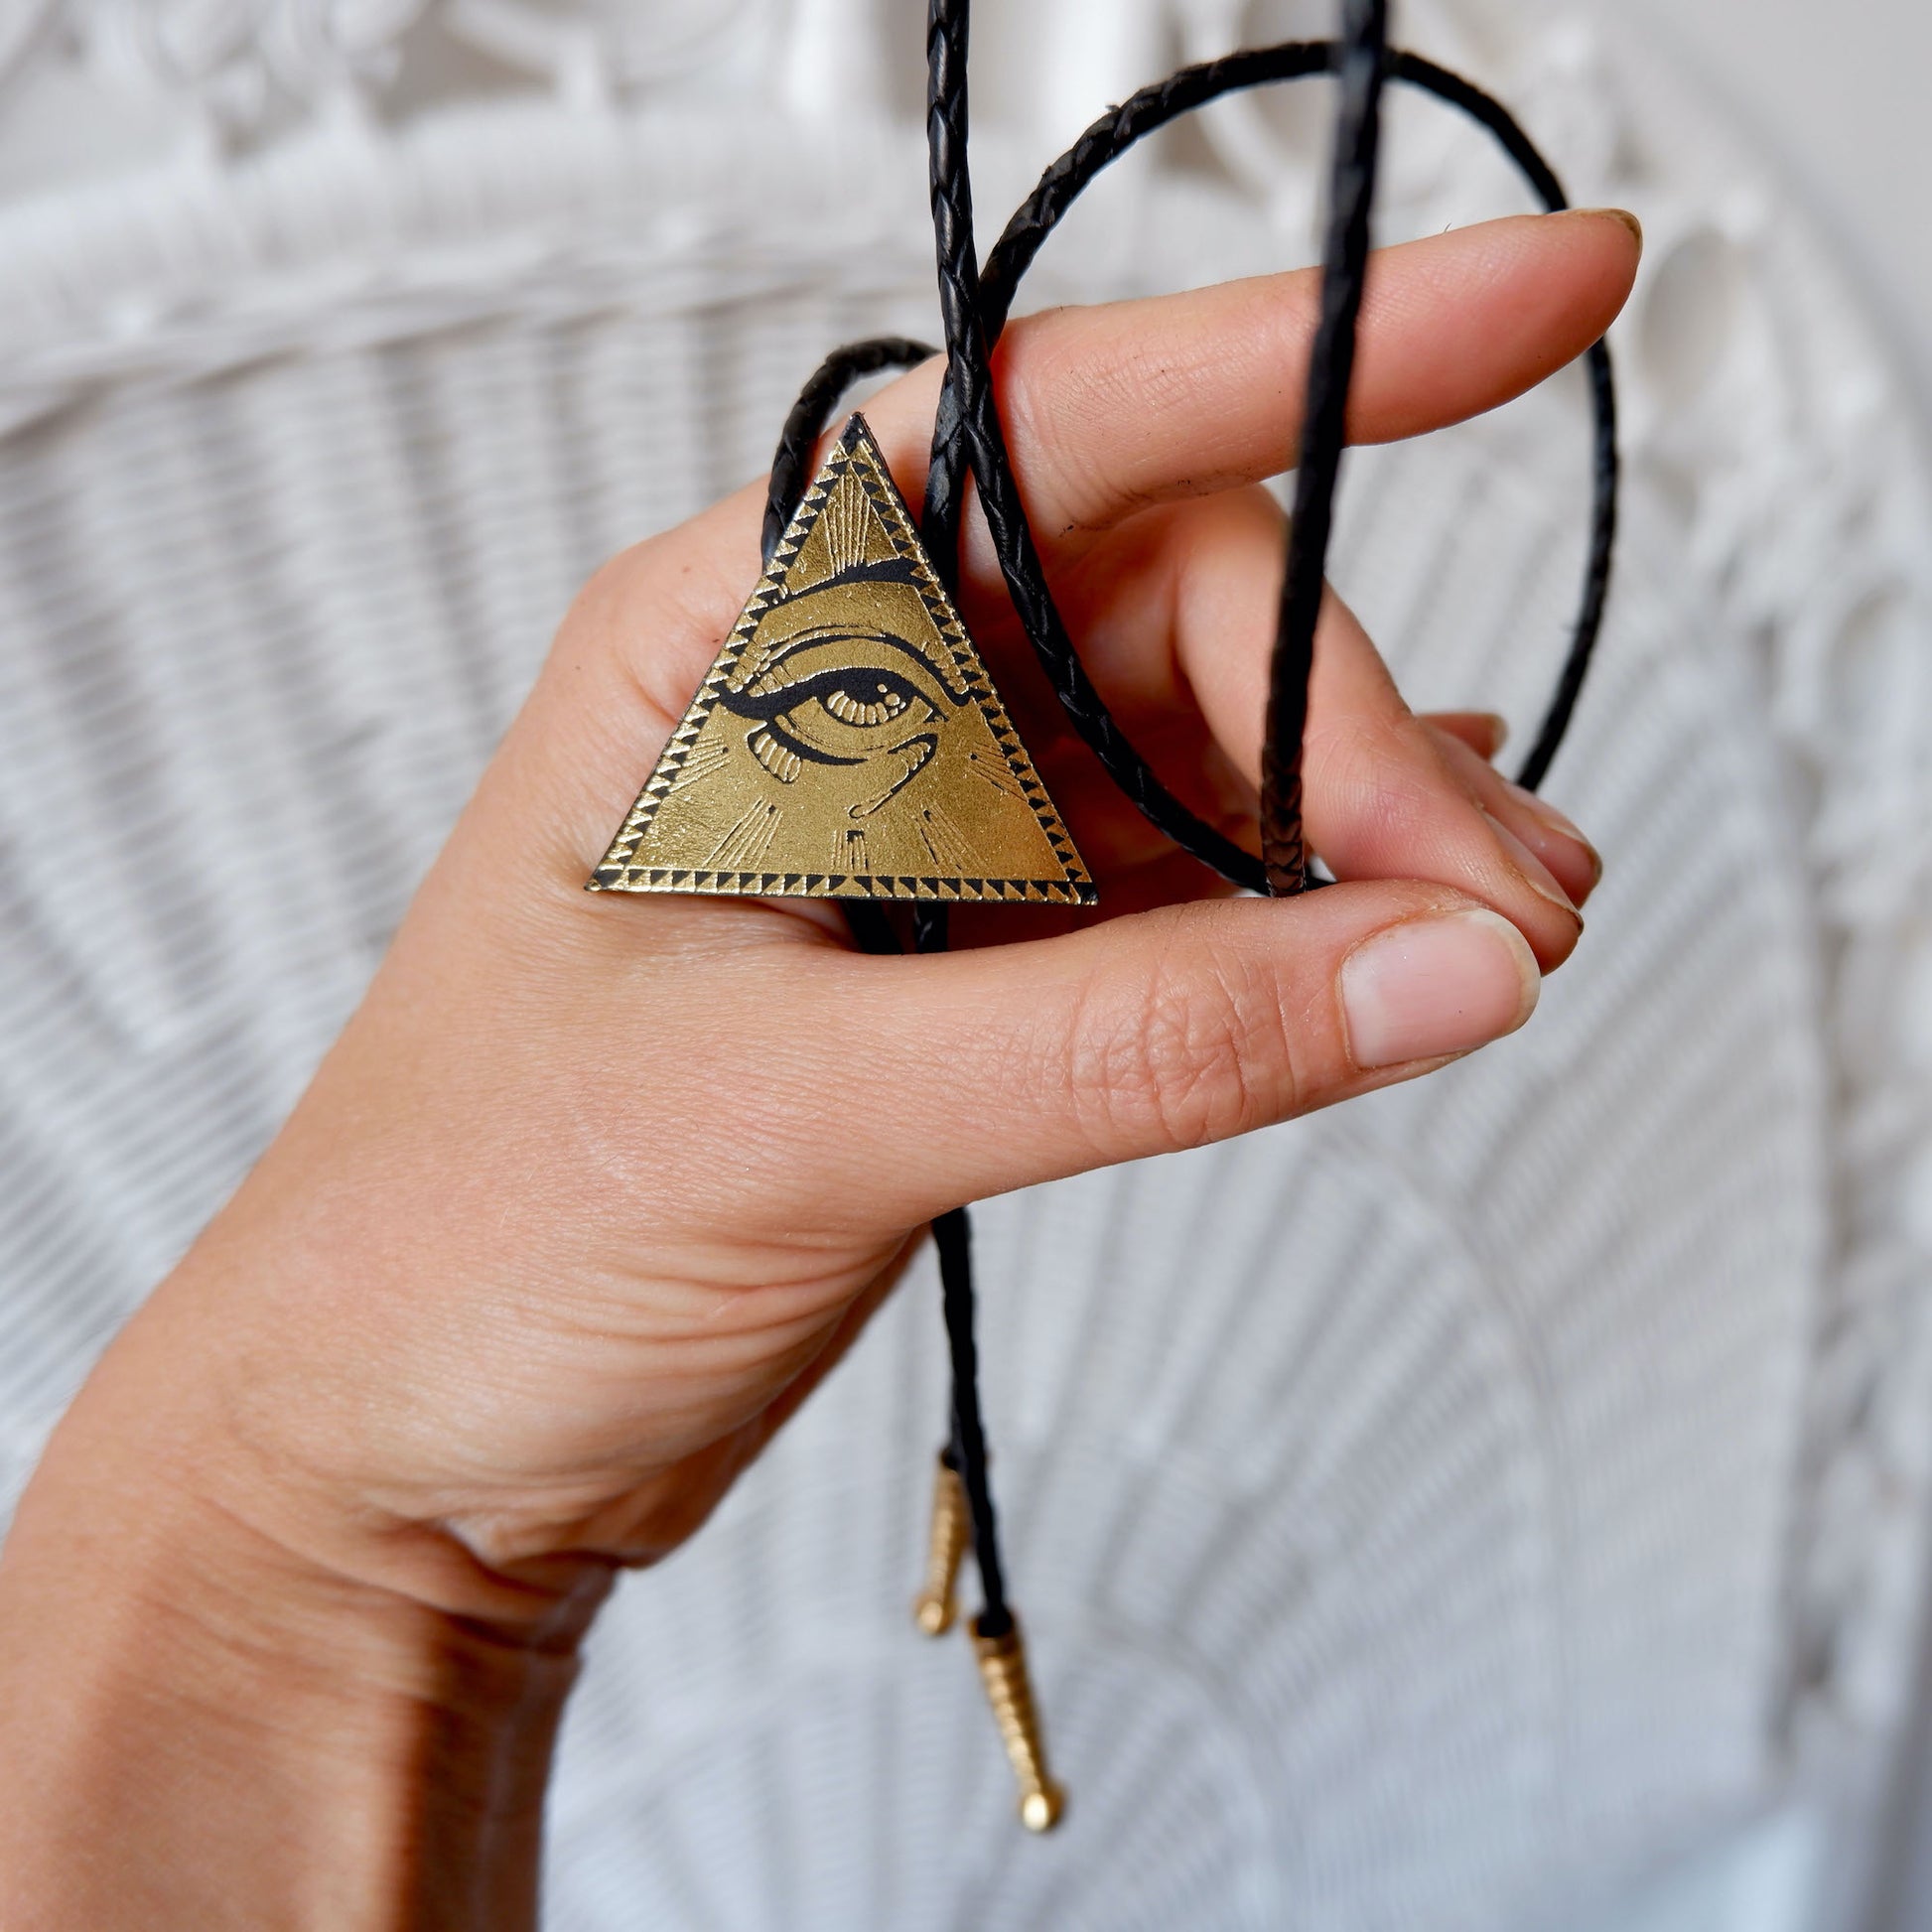 all seeing eye pyramid amulet leather bolo tie